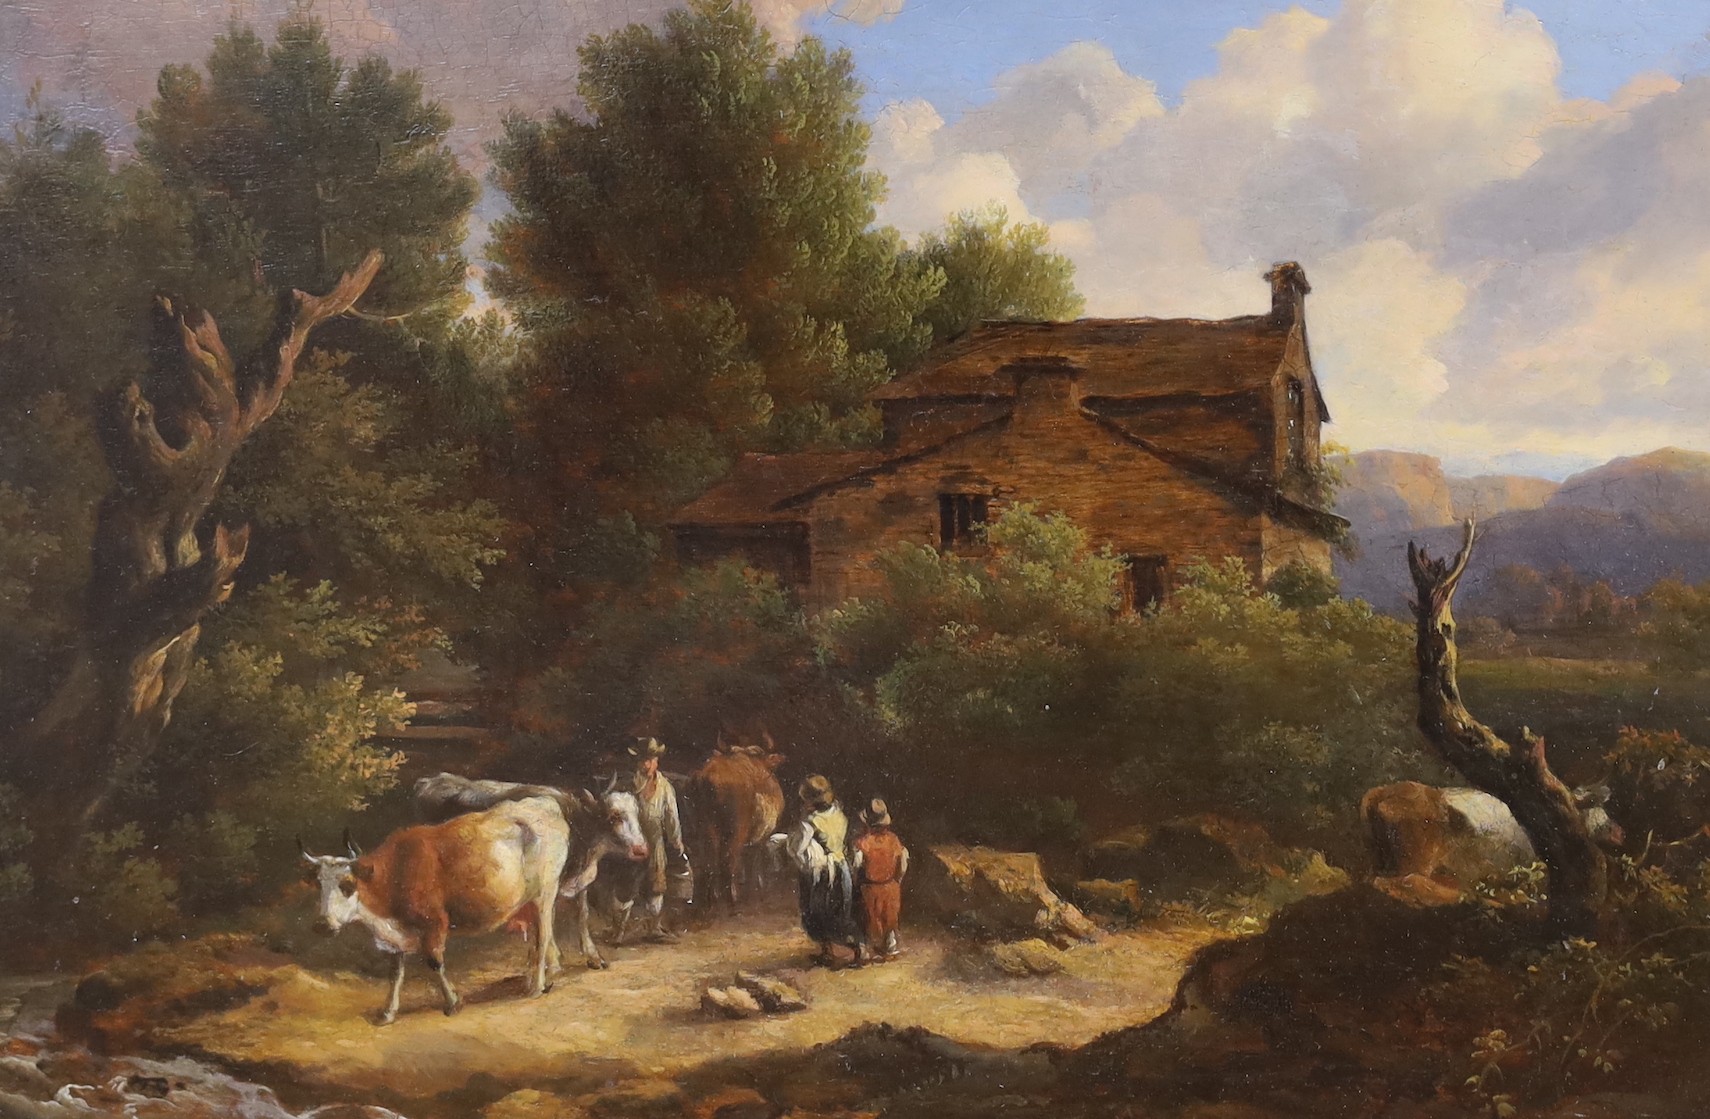 Early 19th century Continental School, oil on wooden panel, Cattle drover in a landscape, 24 x 37cm